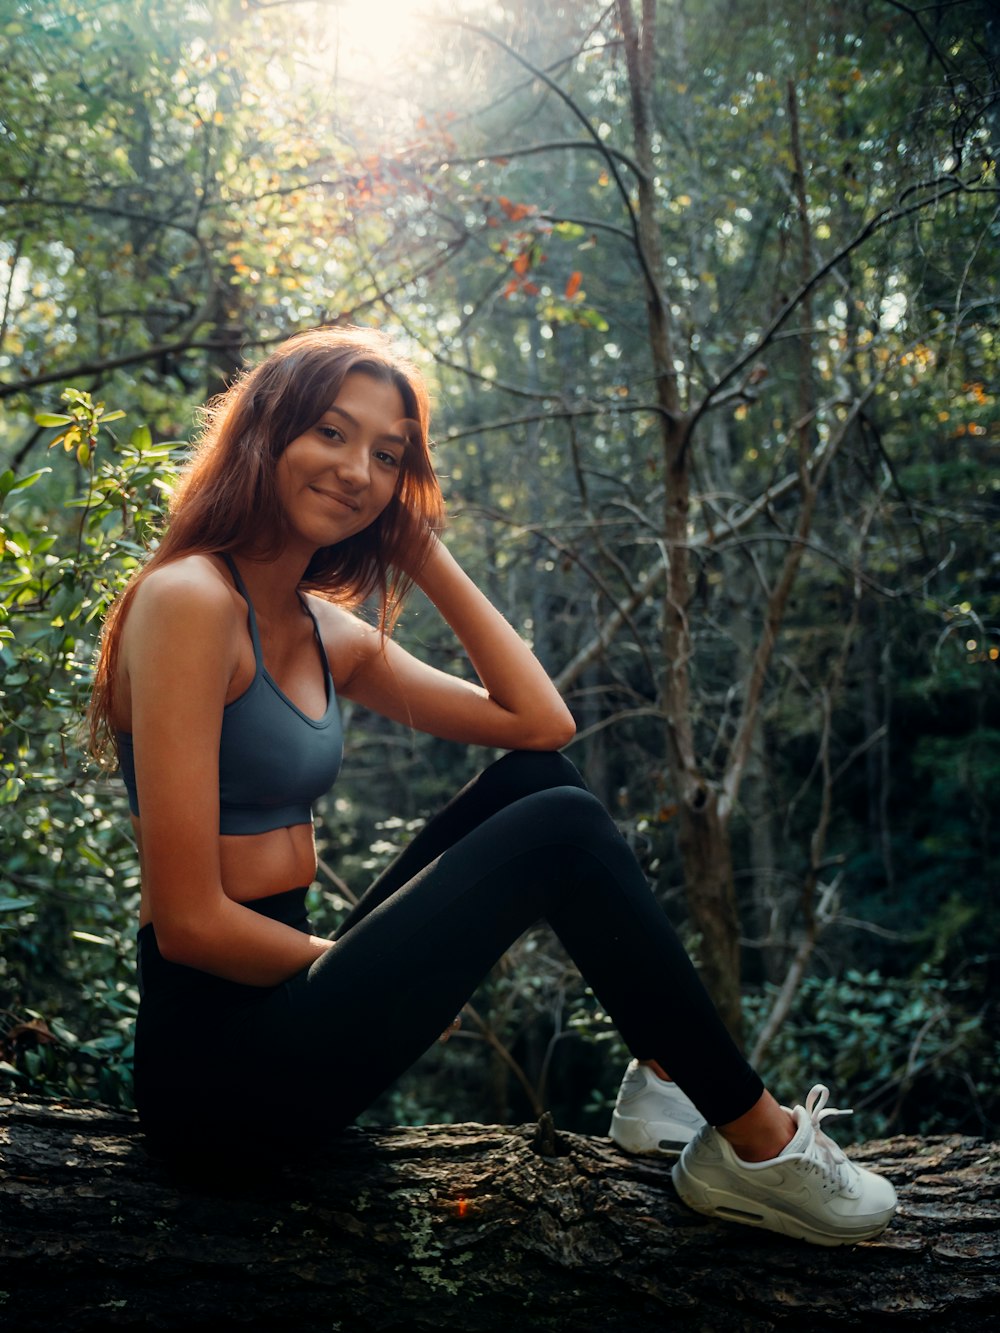 Woman in white sports bra and black pants standing on tree log during  daytime photo – Free Girl Image on Unsplash